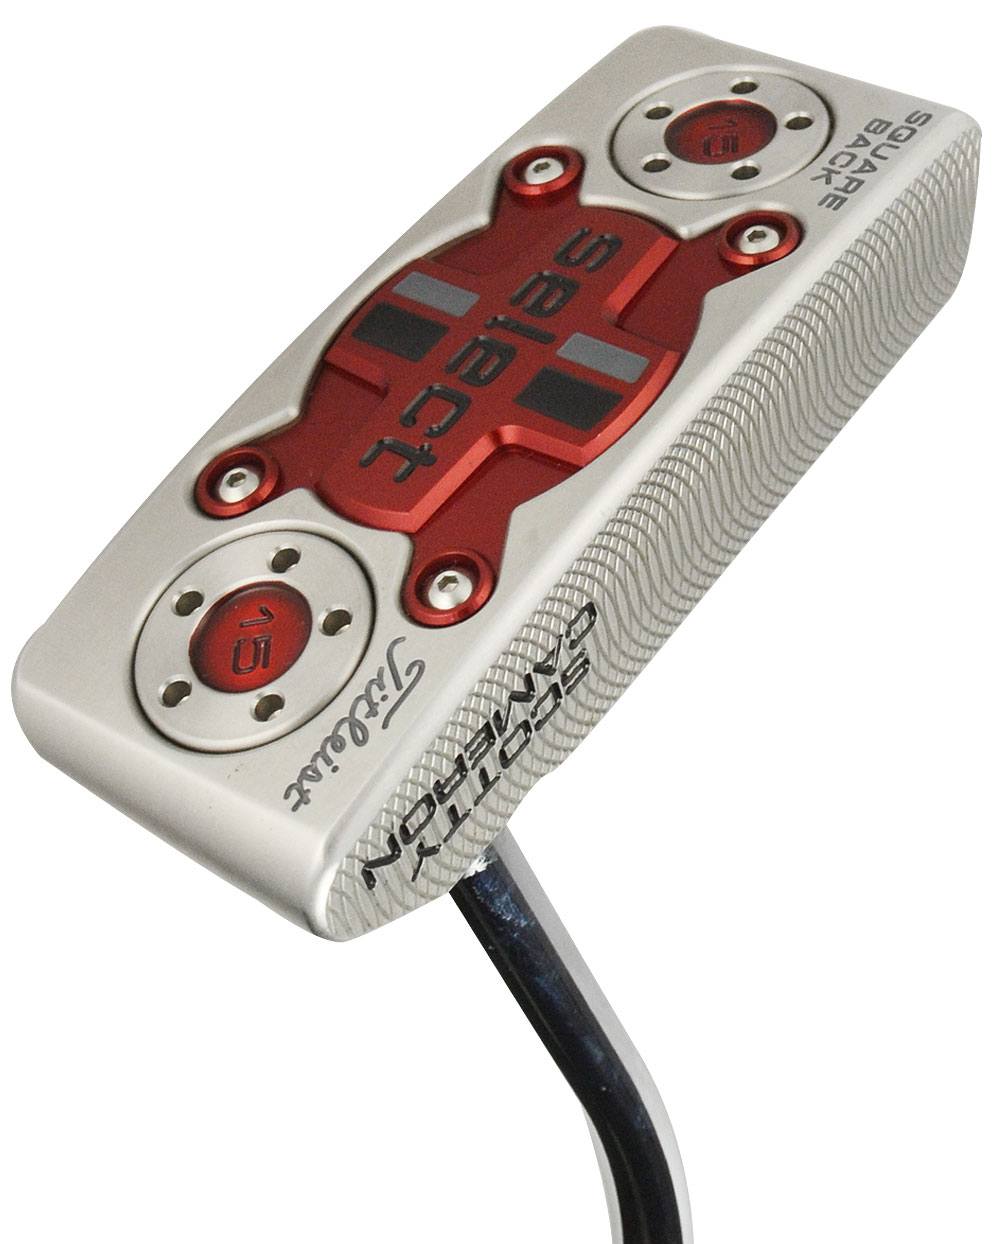 Scotty Cameron Titleist Golf Special select 2015 square back putter 34" steel like new buy now